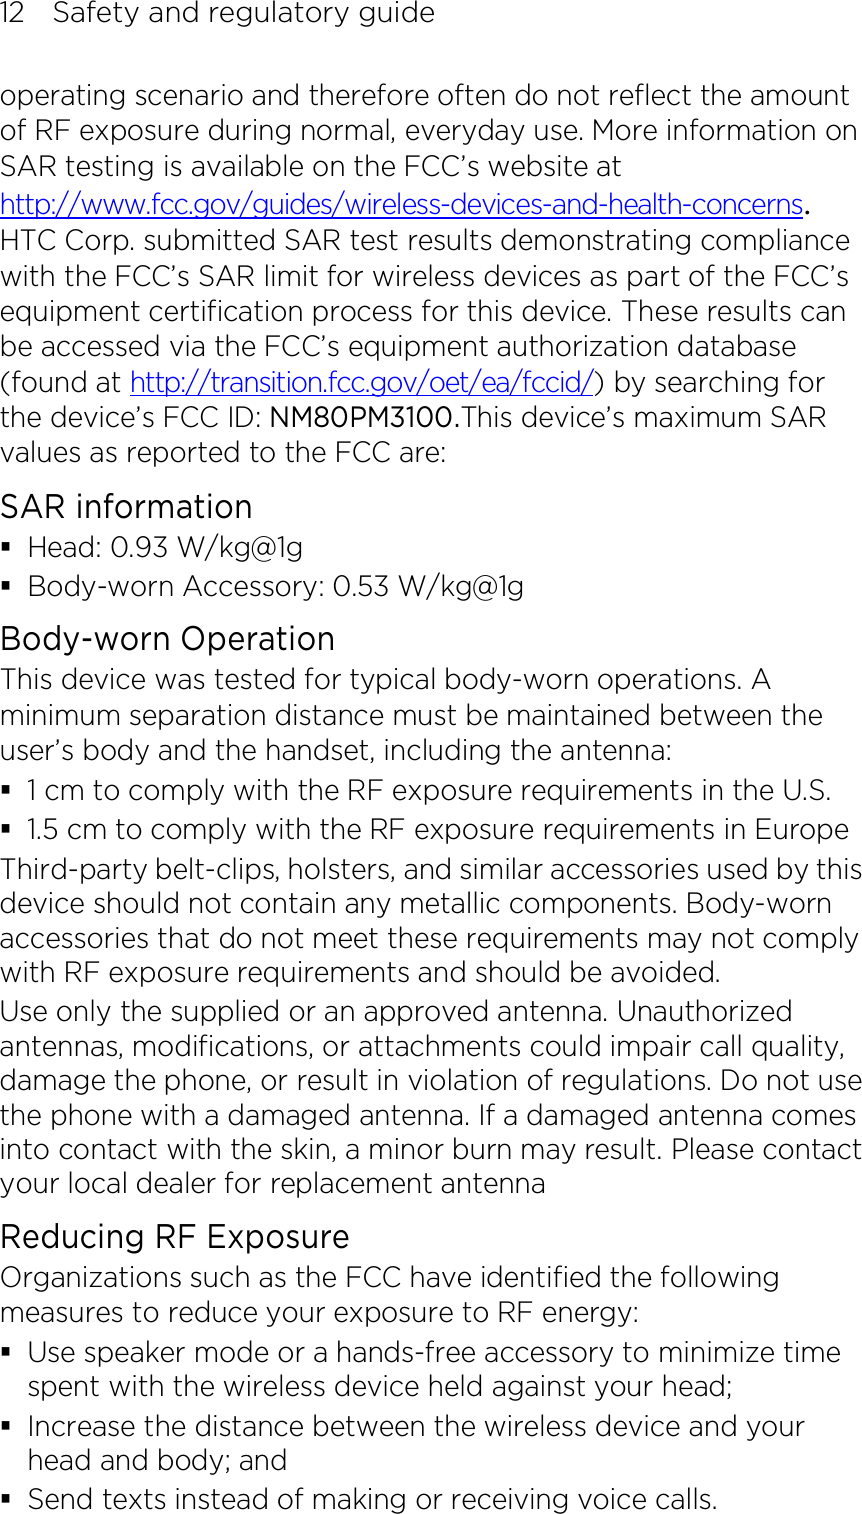 12    Safety and regulatory guide operating scenario and therefore often do not reflect the amount of RF exposure during normal, everyday use. More information on SAR testing is available on the FCC’s website at http://www.fcc.gov/guides/wireless-devices-and-health-concerns.     HTC Corp. submitted SAR test results demonstrating compliance with the FCC’s SAR limit for wireless devices as part of the FCC’s equipment certification process for this device. These results can be accessed via the FCC’s equipment authorization database (found at http://transition.fcc.gov/oet/ea/fccid/) by searching for the device’s FCC ID: NM80PM3100.This device’s maximum SAR values as reported to the FCC are: SAR information  Head: 0.93 W/kg@1g  Body-worn Accessory: 0.53 W/kg@1g Body-worn Operation This device was tested for typical body-worn operations. A minimum separation distance must be maintained between the user’s body and the handset, including the antenna:  1 cm to comply with the RF exposure requirements in the U.S.  1.5 cm to comply with the RF exposure requirements in Europe Third-party belt-clips, holsters, and similar accessories used by this device should not contain any metallic components. Body-worn accessories that do not meet these requirements may not comply with RF exposure requirements and should be avoided.   Use only the supplied or an approved antenna. Unauthorized antennas, modifications, or attachments could impair call quality, damage the phone, or result in violation of regulations. Do not use the phone with a damaged antenna. If a damaged antenna comes into contact with the skin, a minor burn may result. Please contact your local dealer for replacement antenna Reducing RF Exposure   Organizations such as the FCC have identified the following measures to reduce your exposure to RF energy:  Use speaker mode or a hands-free accessory to minimize time spent with the wireless device held against your head;    Increase the distance between the wireless device and your head and body; and  Send texts instead of making or receiving voice calls. 